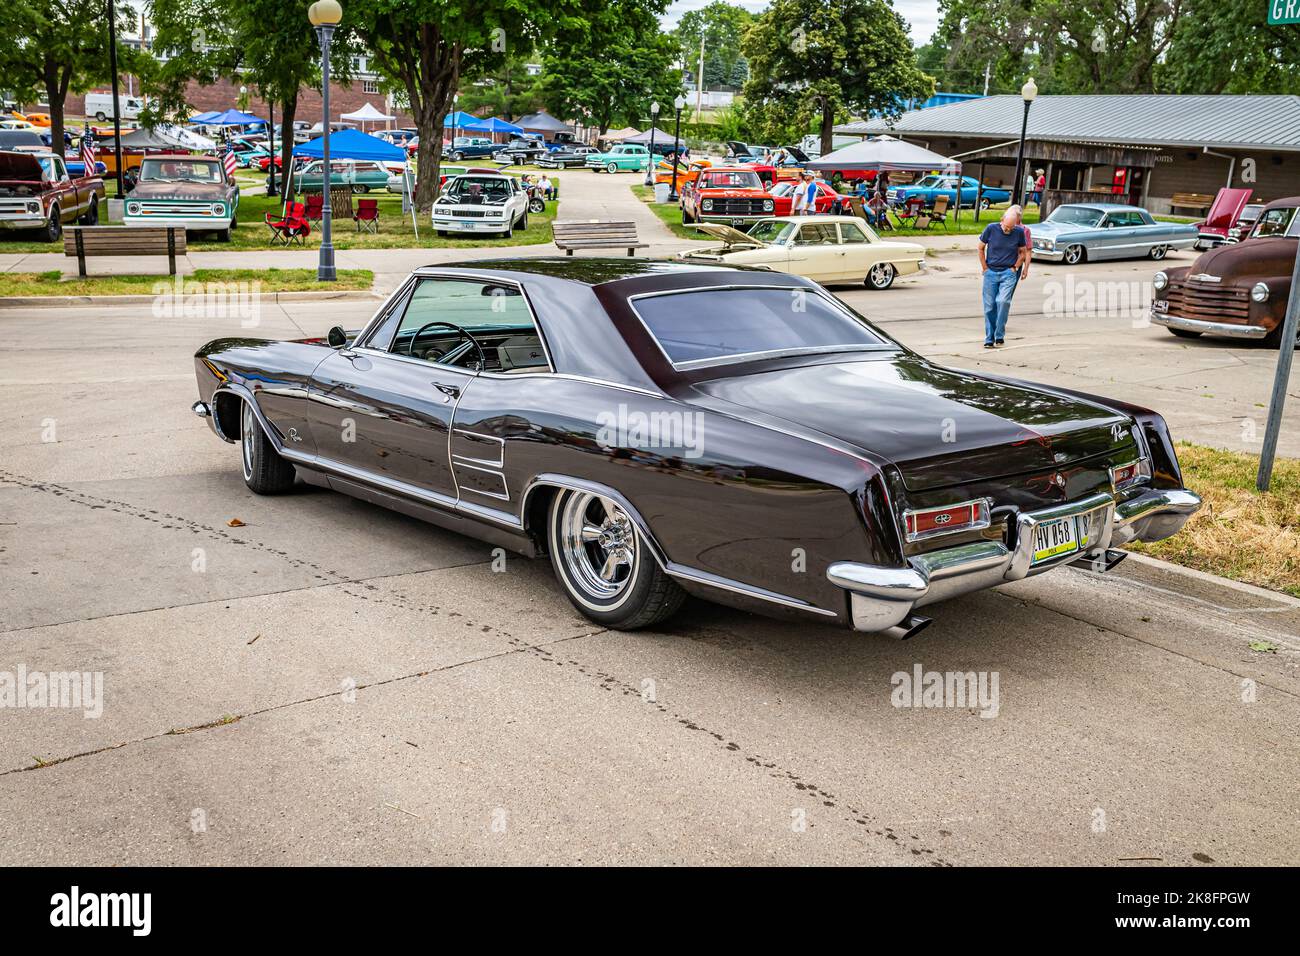 Des Moines, IA - July 01, 2022: High perspective rear corner view of a 1964 Buick Riviera Hardtop Coupe at a local car show. Stock Photo